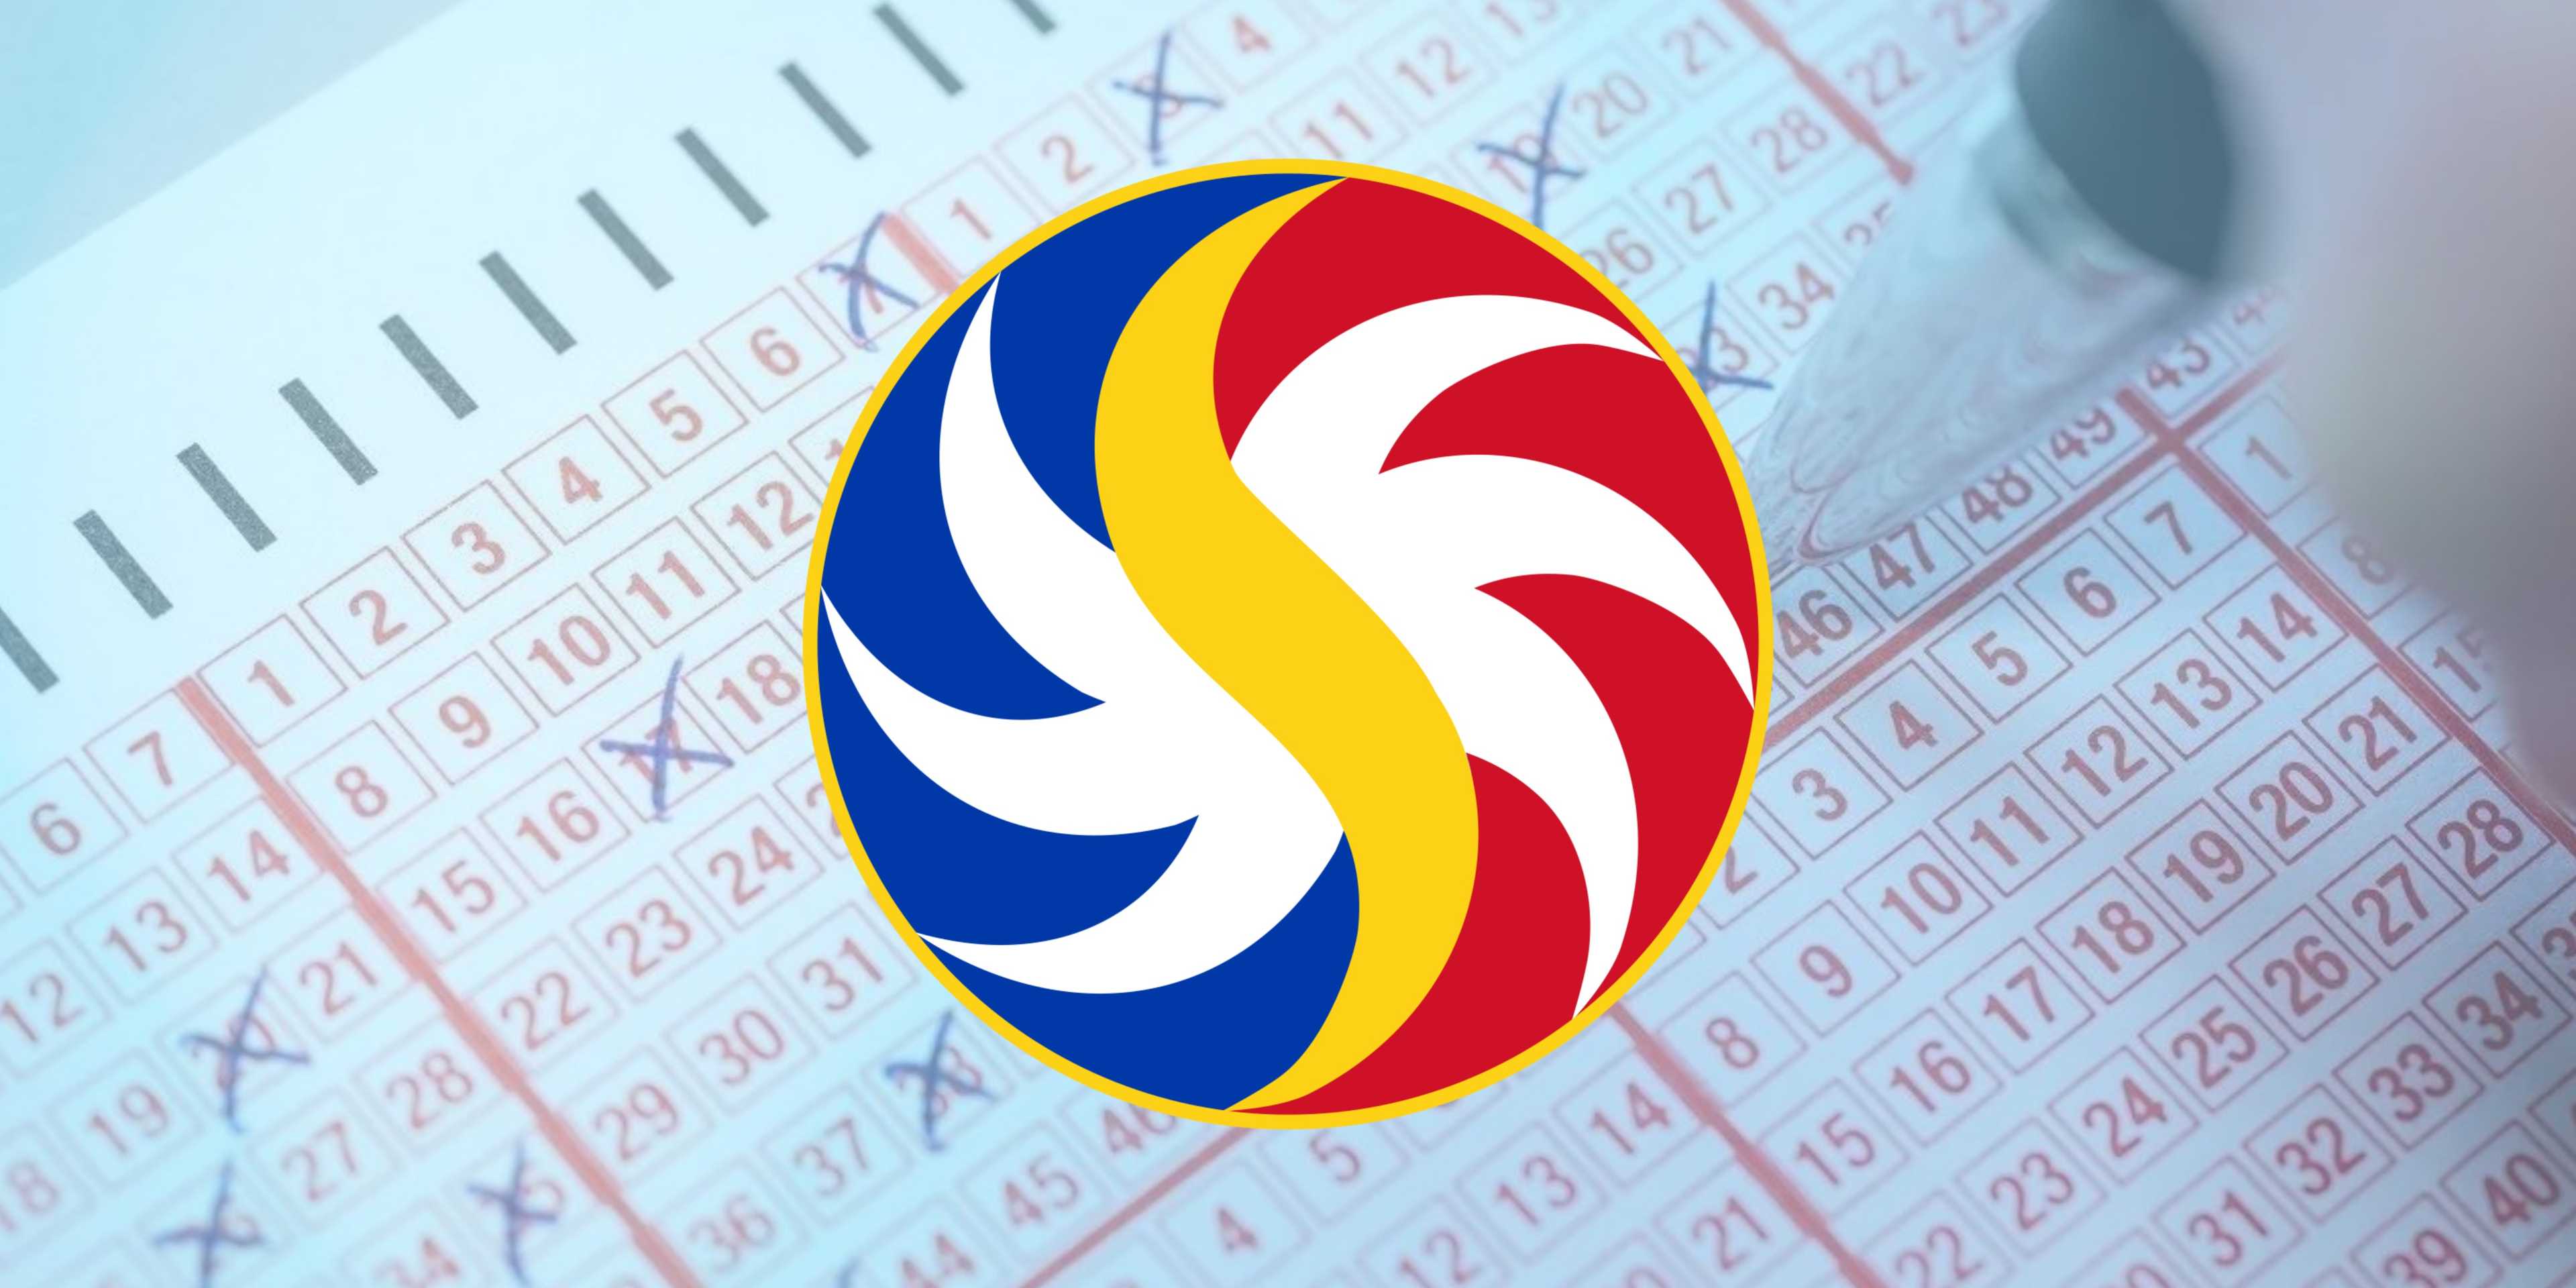 PCSO Lotto Draw Results on Thursday, March 7